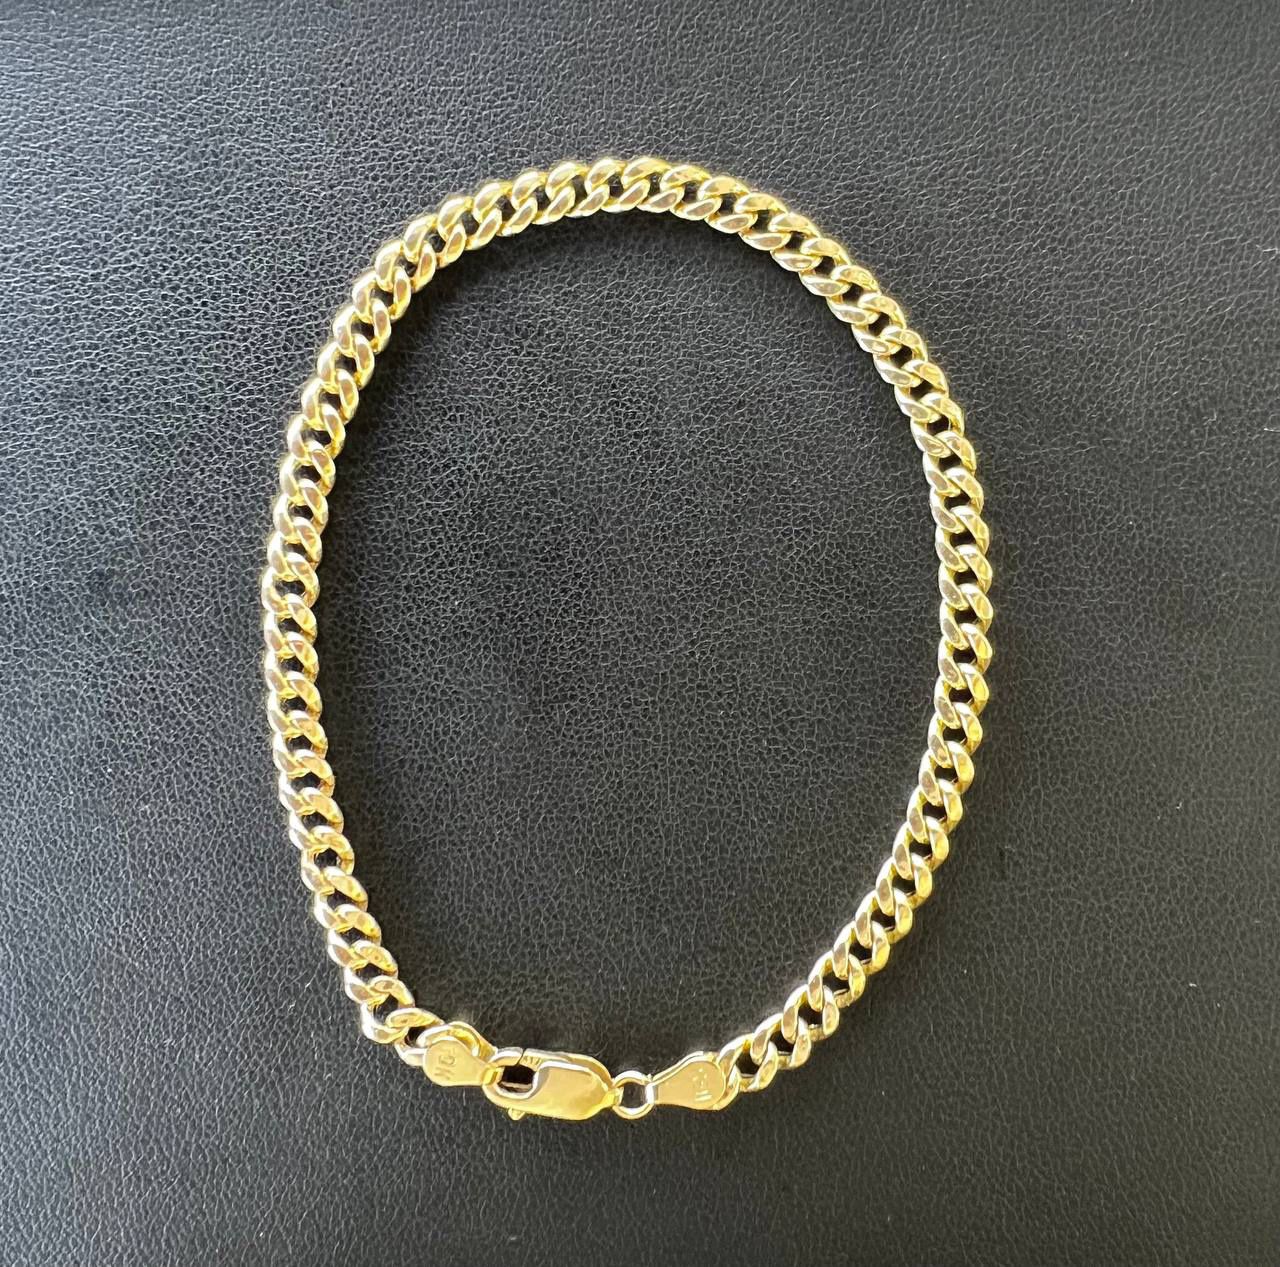 10k sold yellow gold hollow curb Cuban bracelet 8 inch